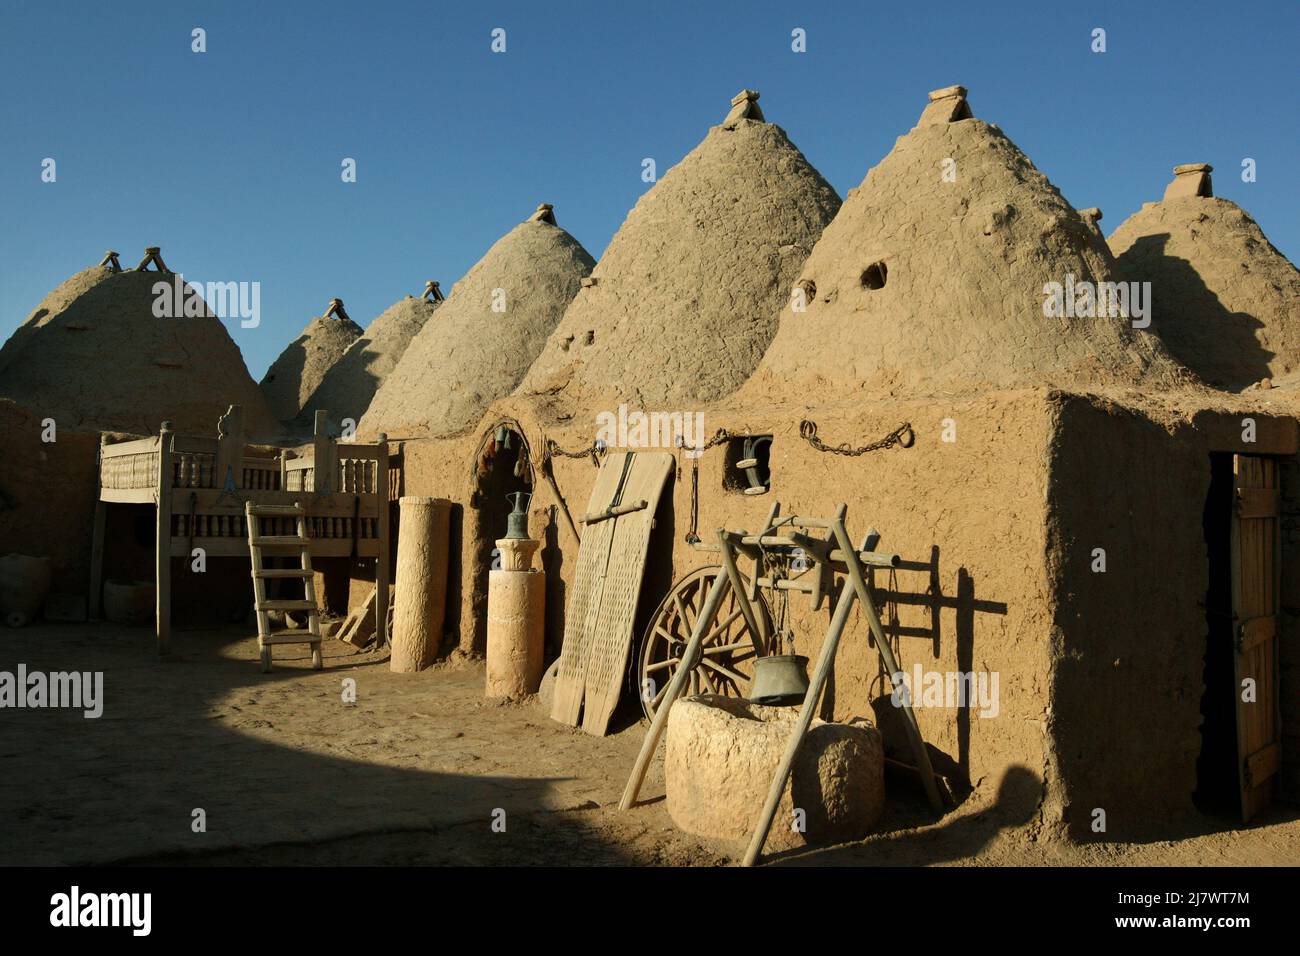 An ancient beehive home at Harran in Turkey. The homes are made of mud and clay bricks and are designed to reduce heat inside during summer. Stock Photo